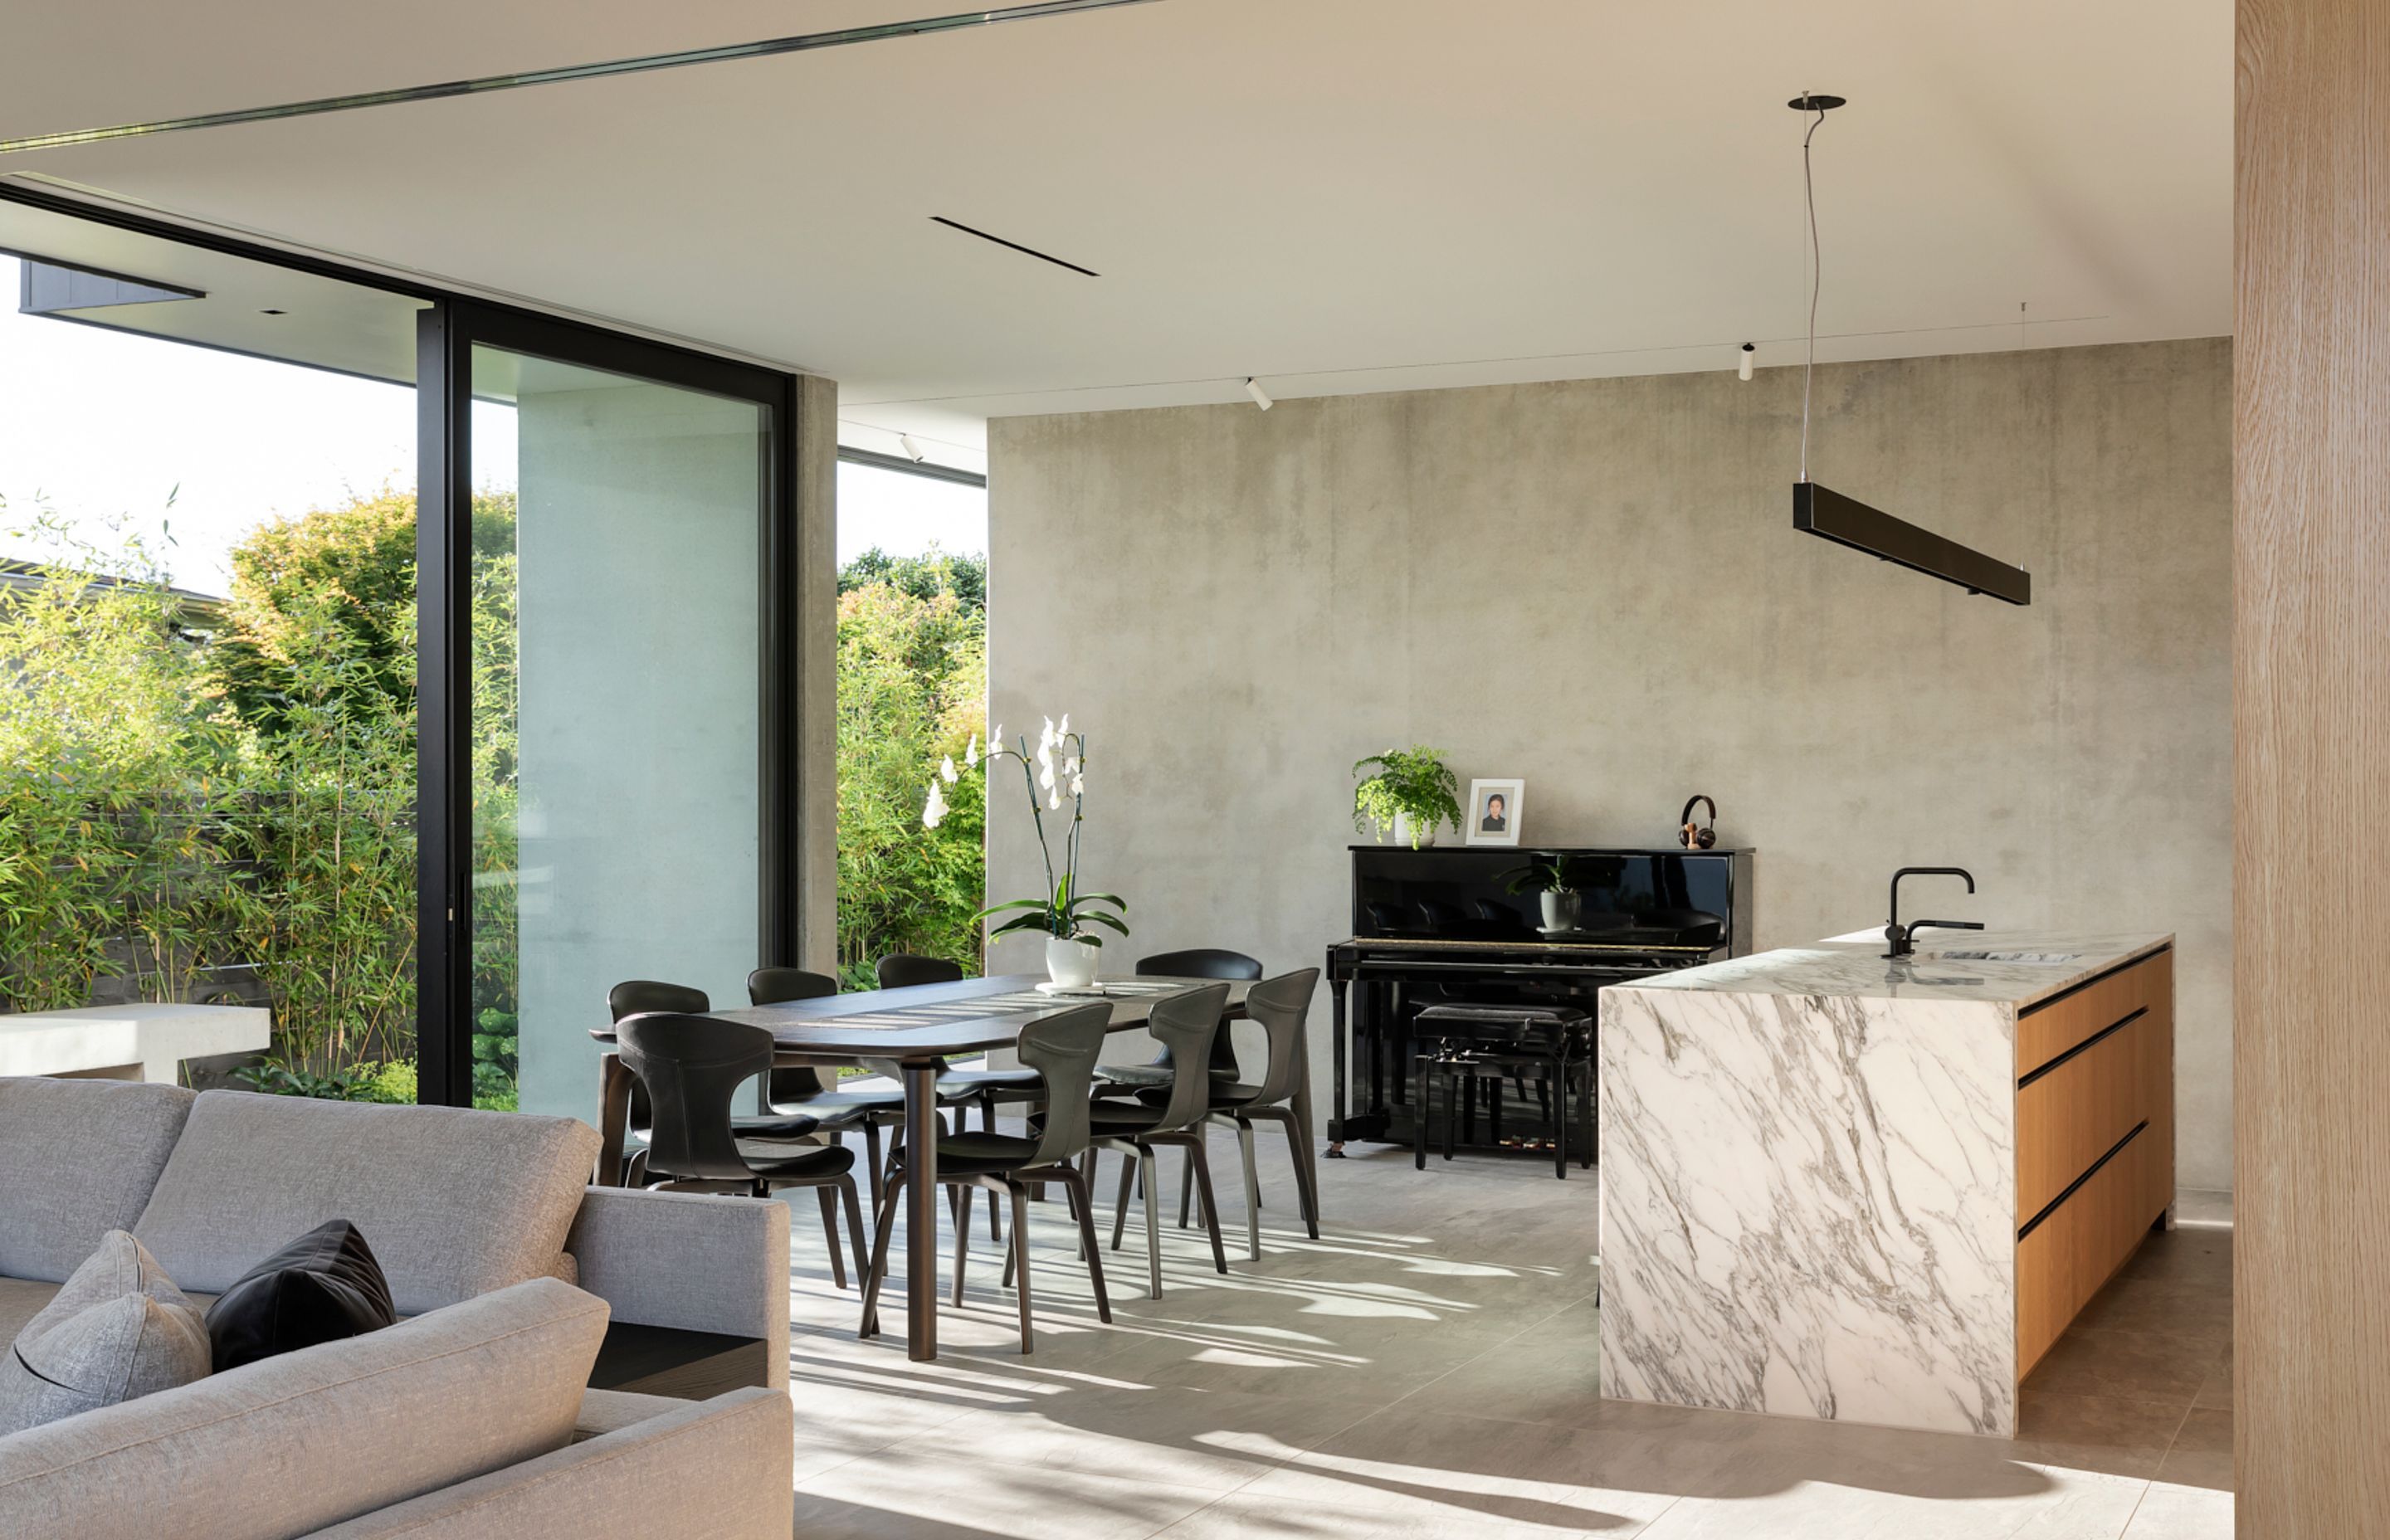 A black piano takes centrestage against a polished concrete wall while the beautiful veining in the marble kitchen island competes with the bamboo shadows on the floor.